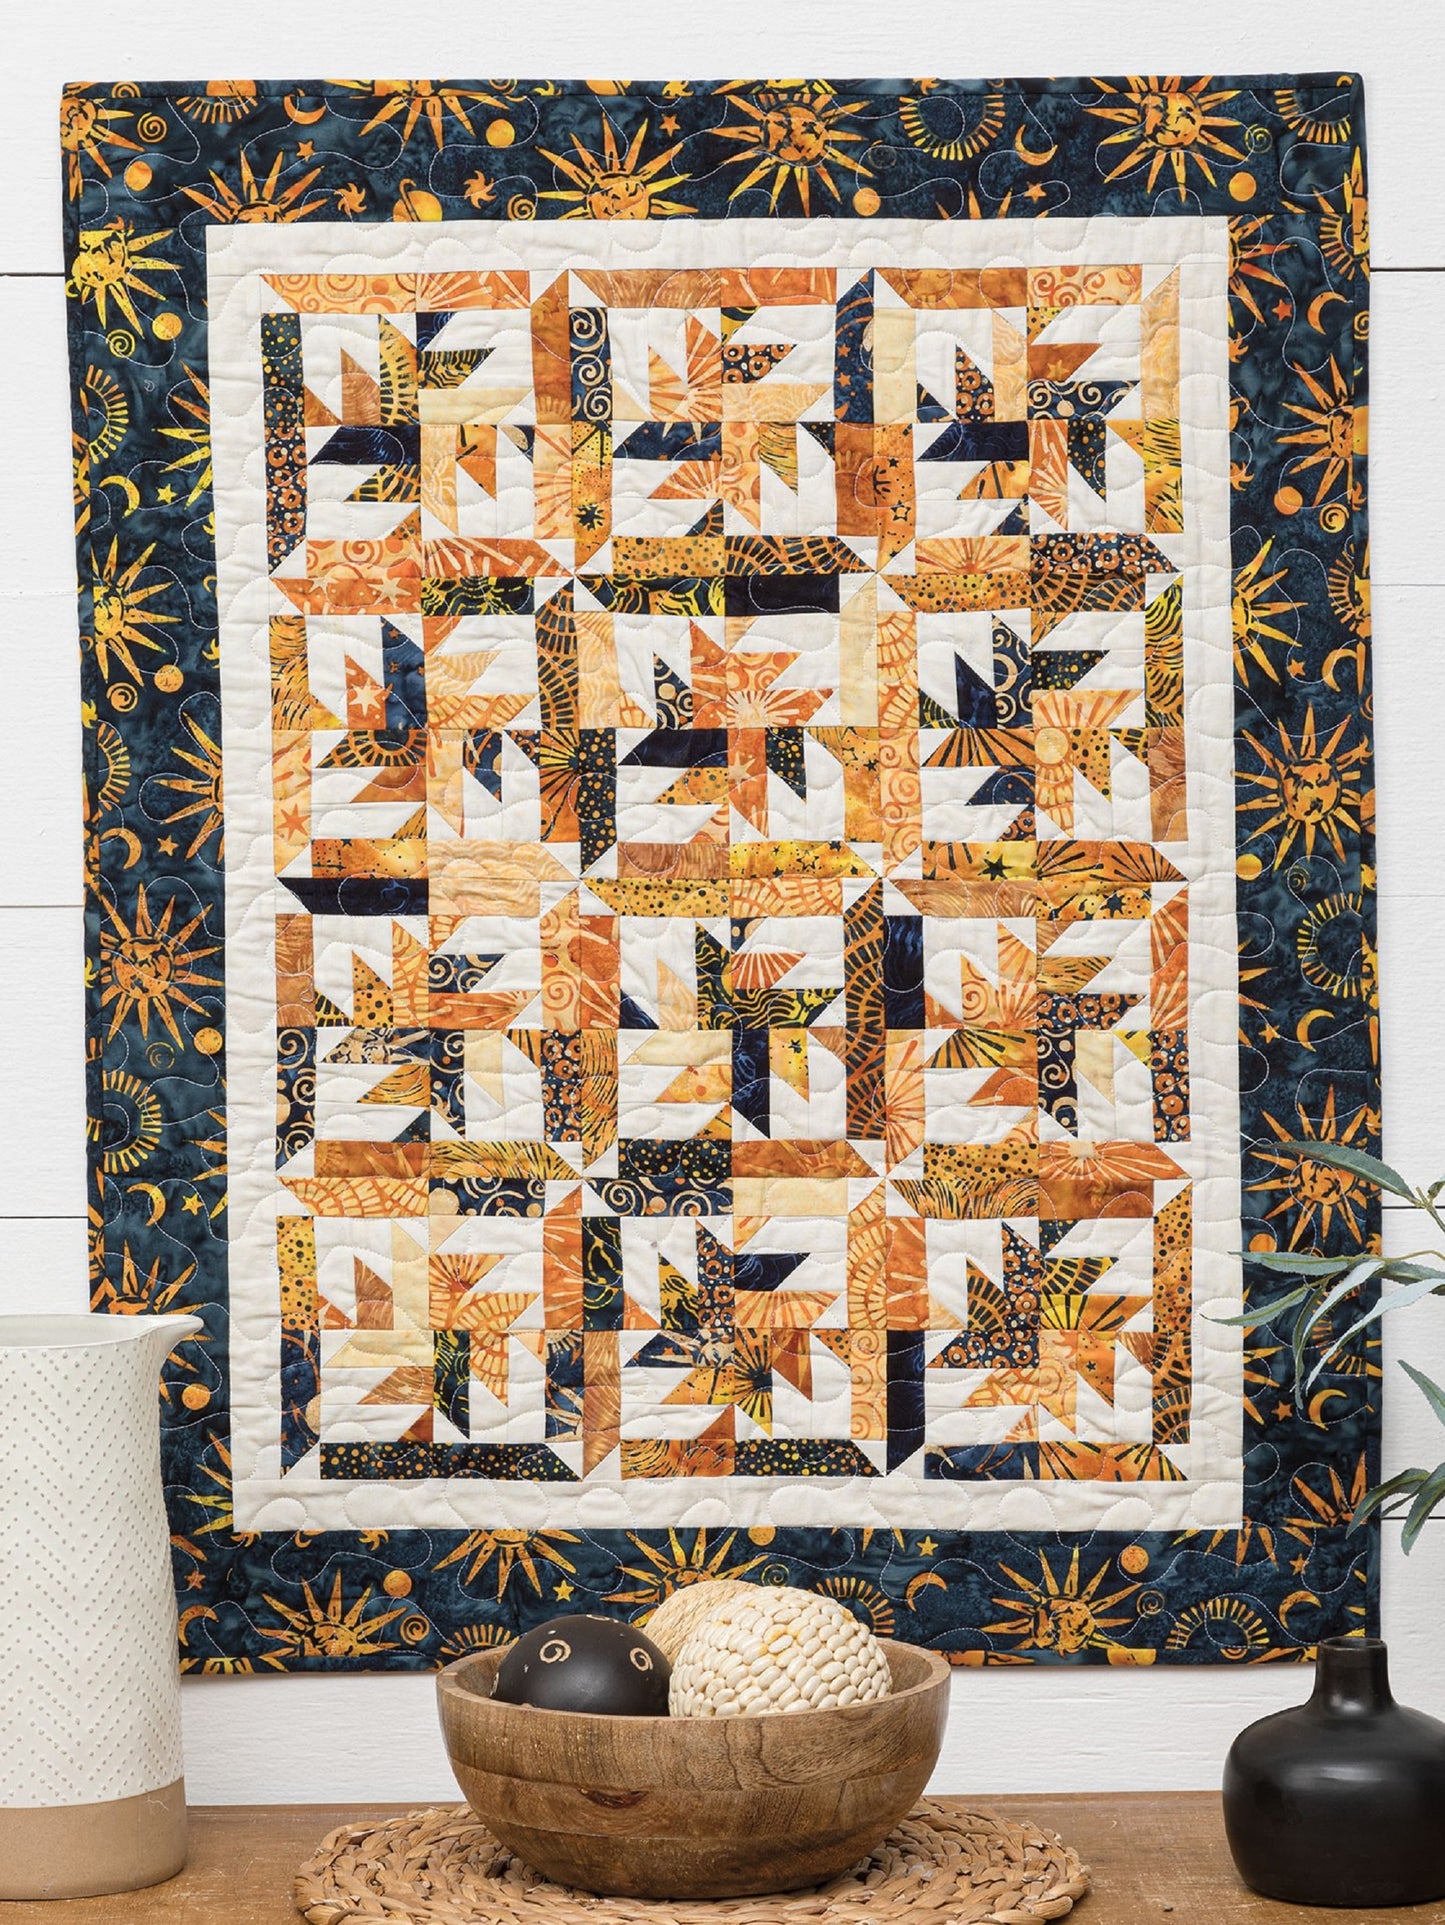 Charming Jelly Roll Quilts by Annie's Quilting-8 Projects